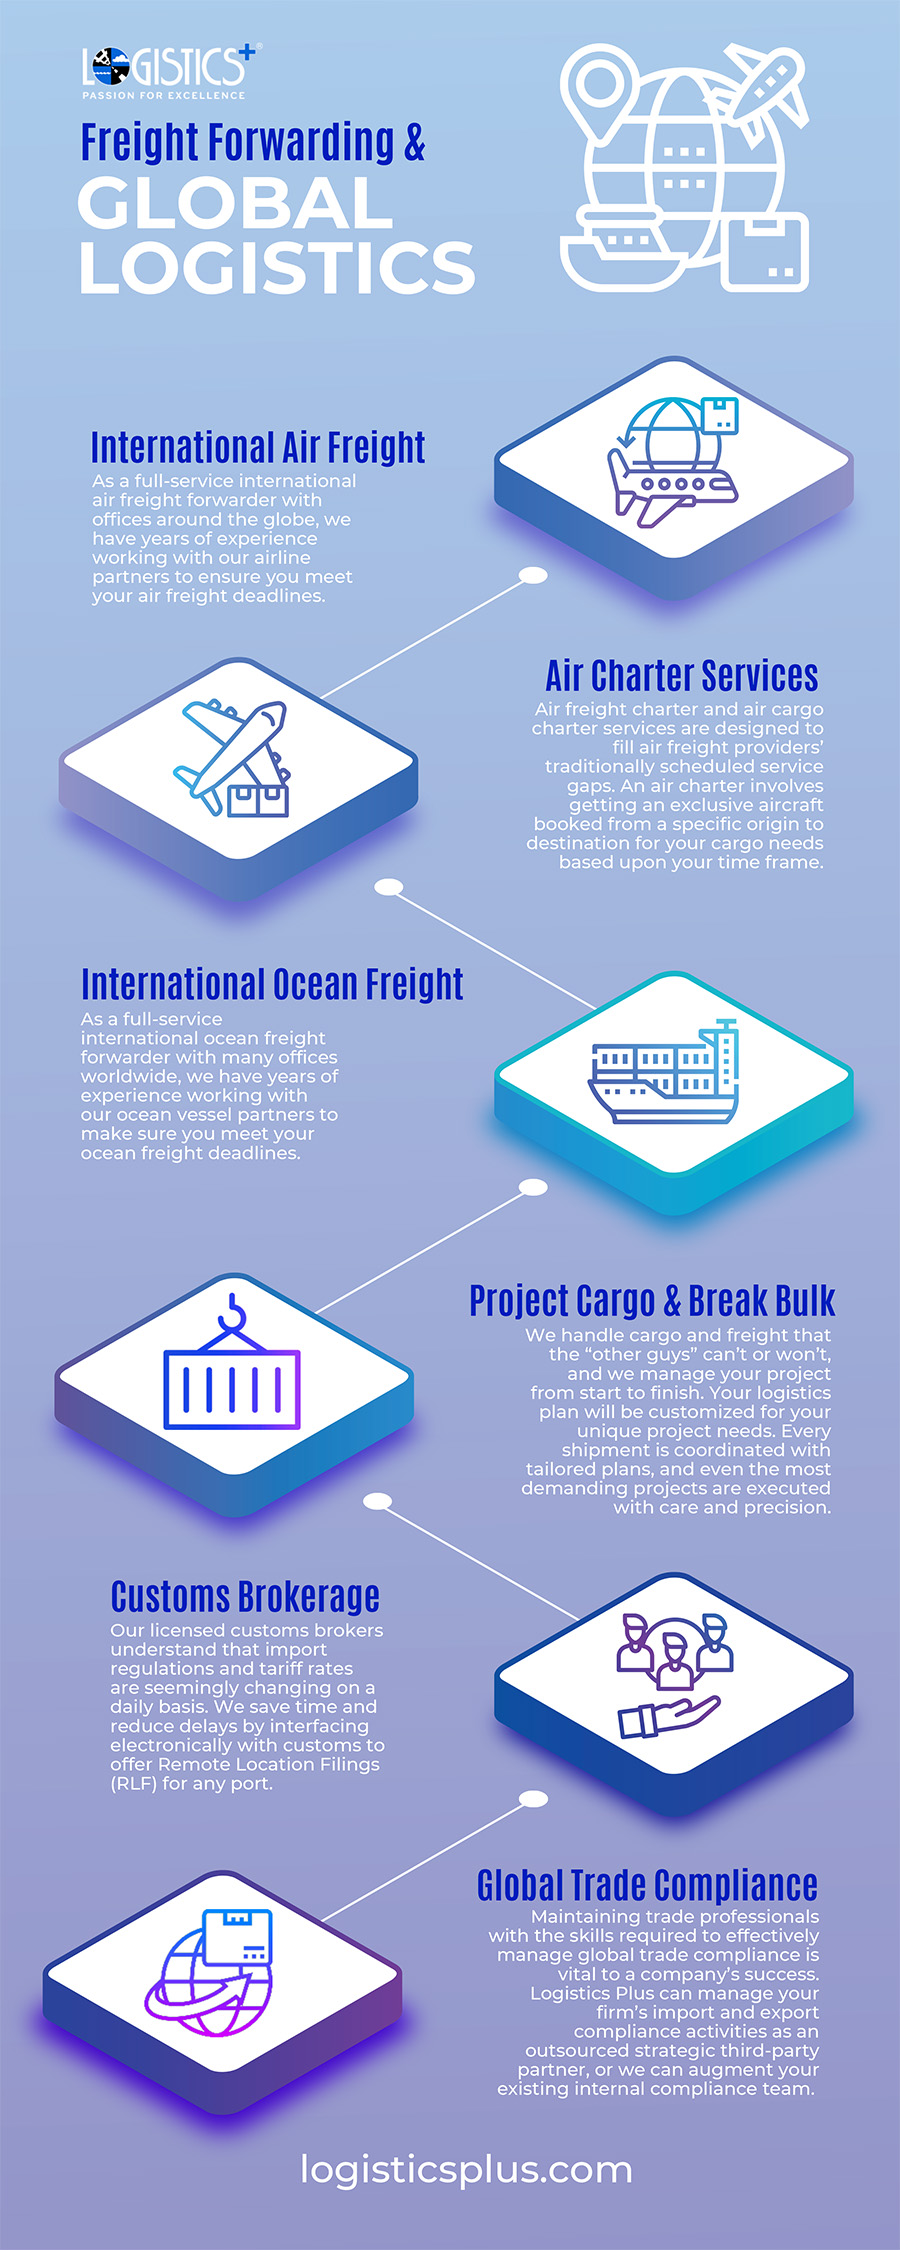 freight forwarding and global logistics infographic